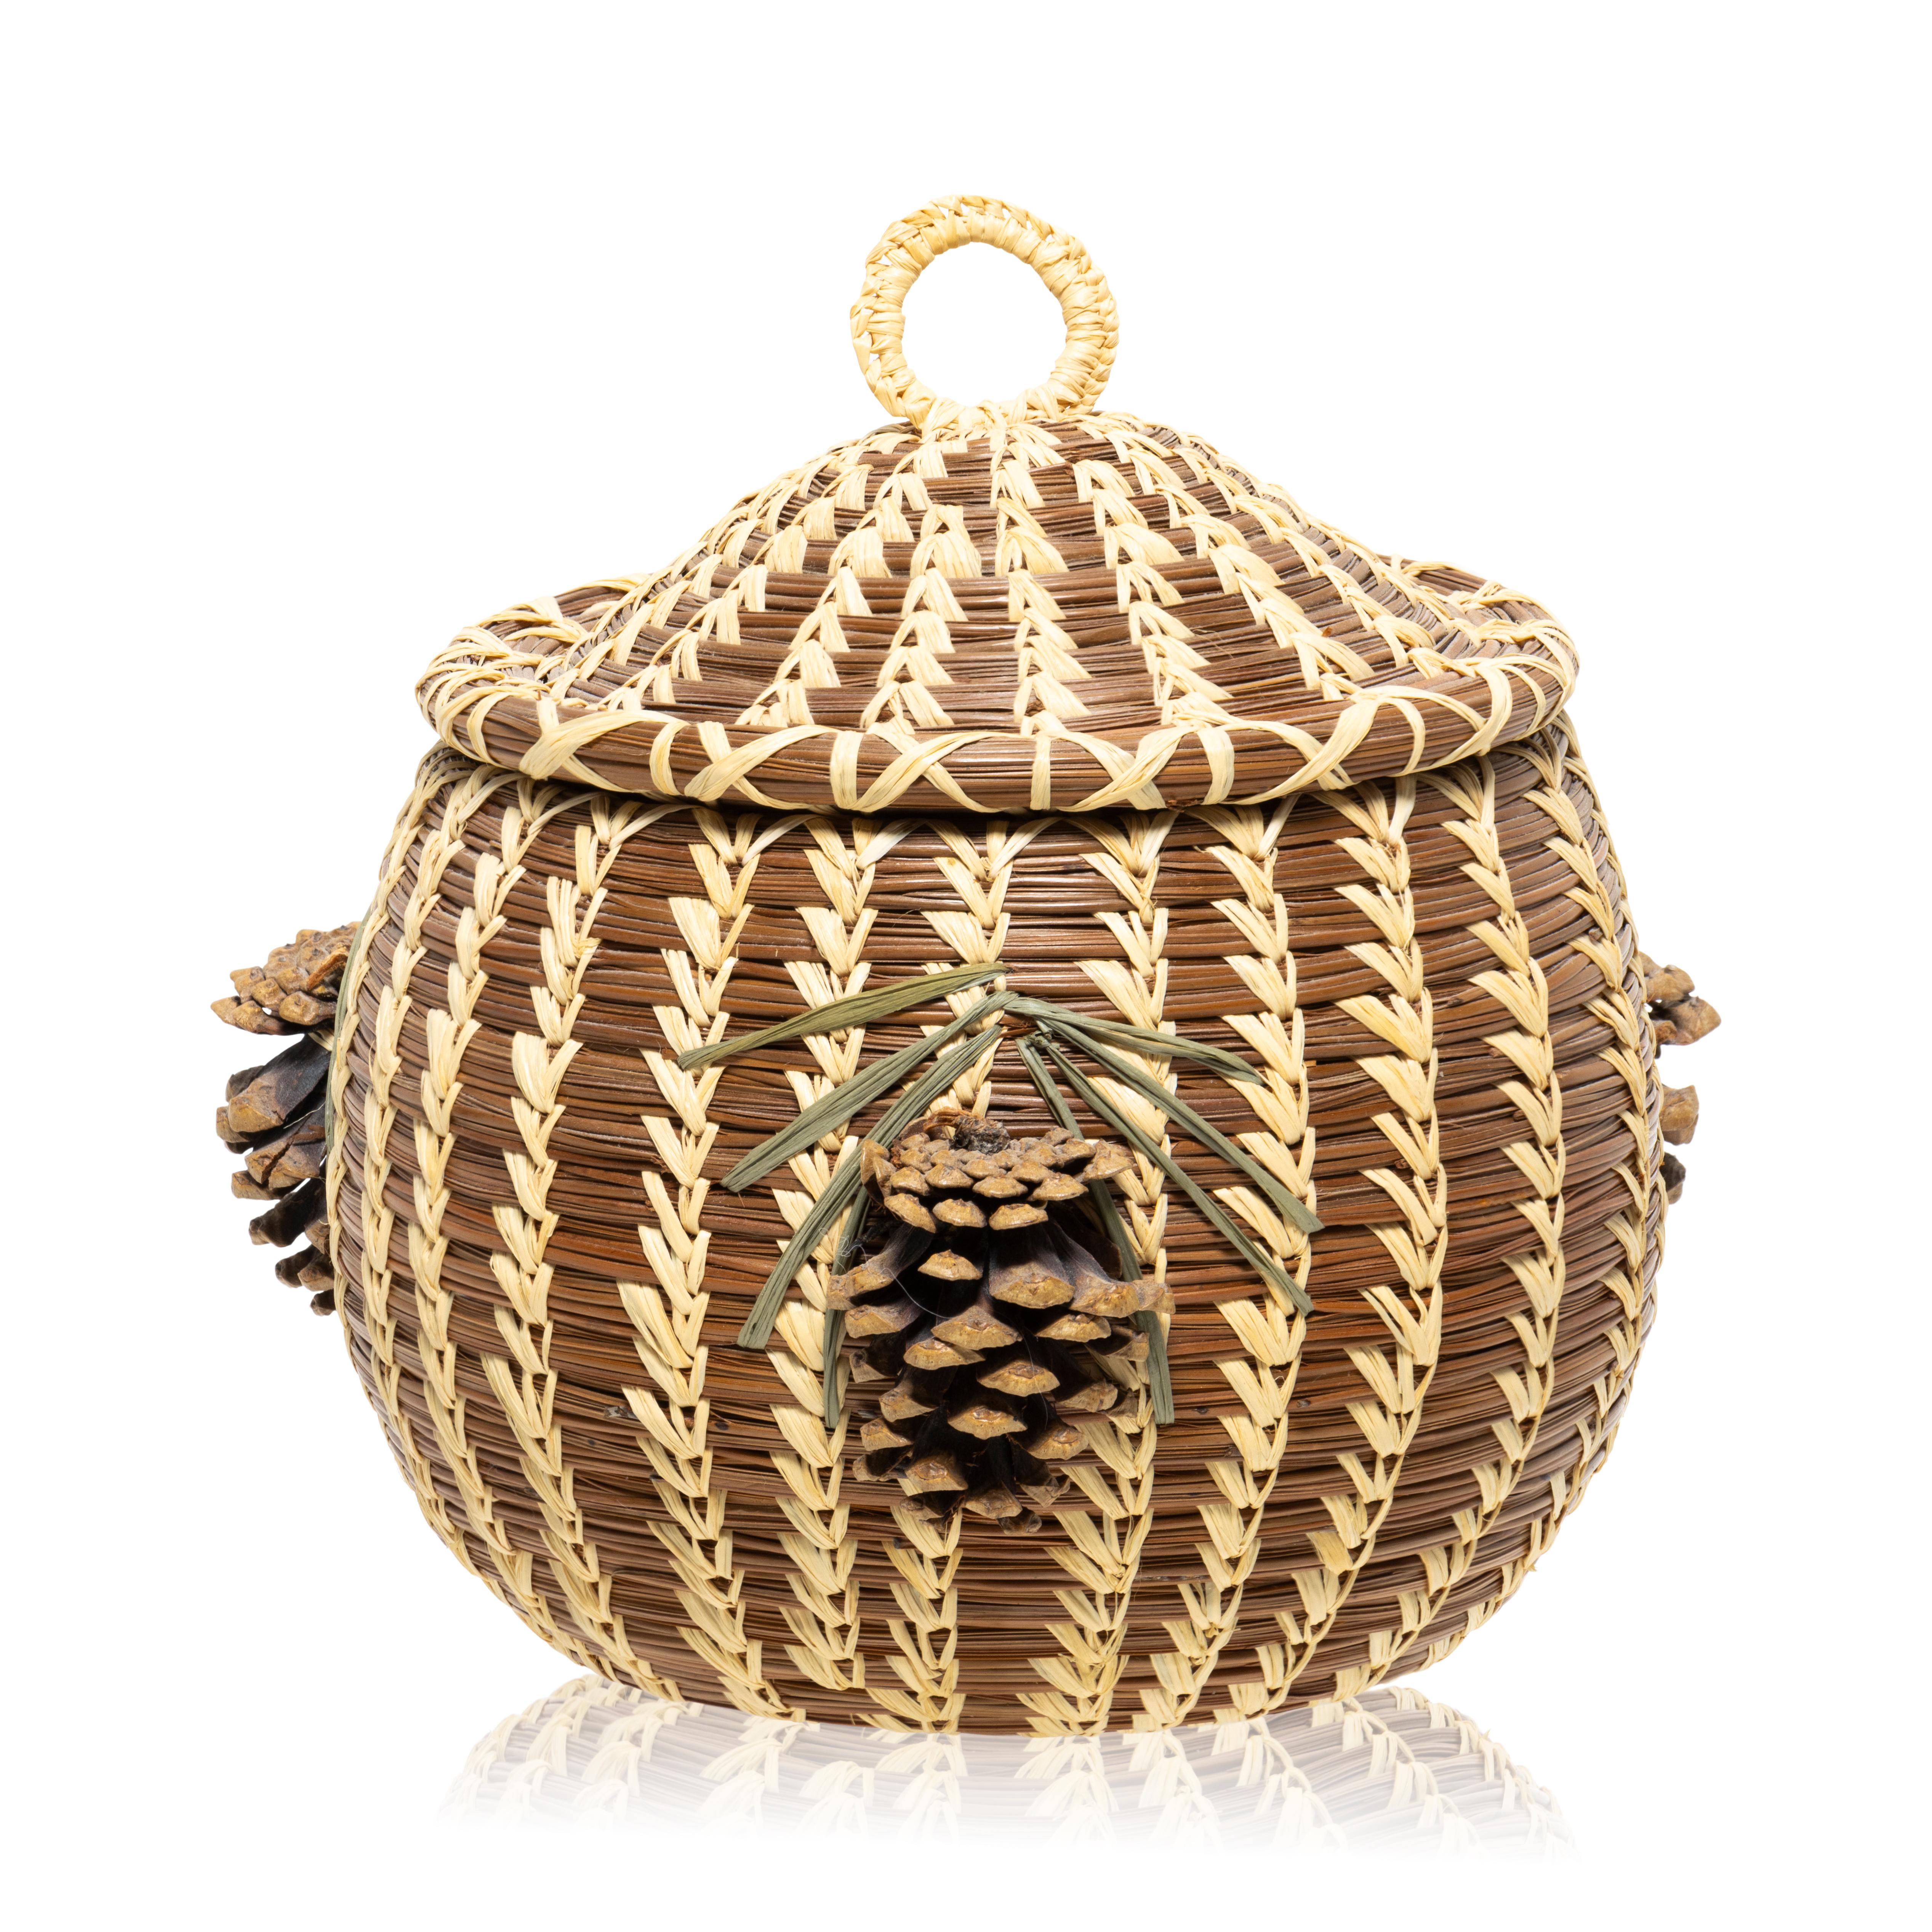 Coushatta lidded pine needle basket with pine cone and needle décor two sides and top. This woven by L.C. John, the last of the great Coushatta basket makers. This basket is made from longleaf pine needles native to the state stitched with raffia